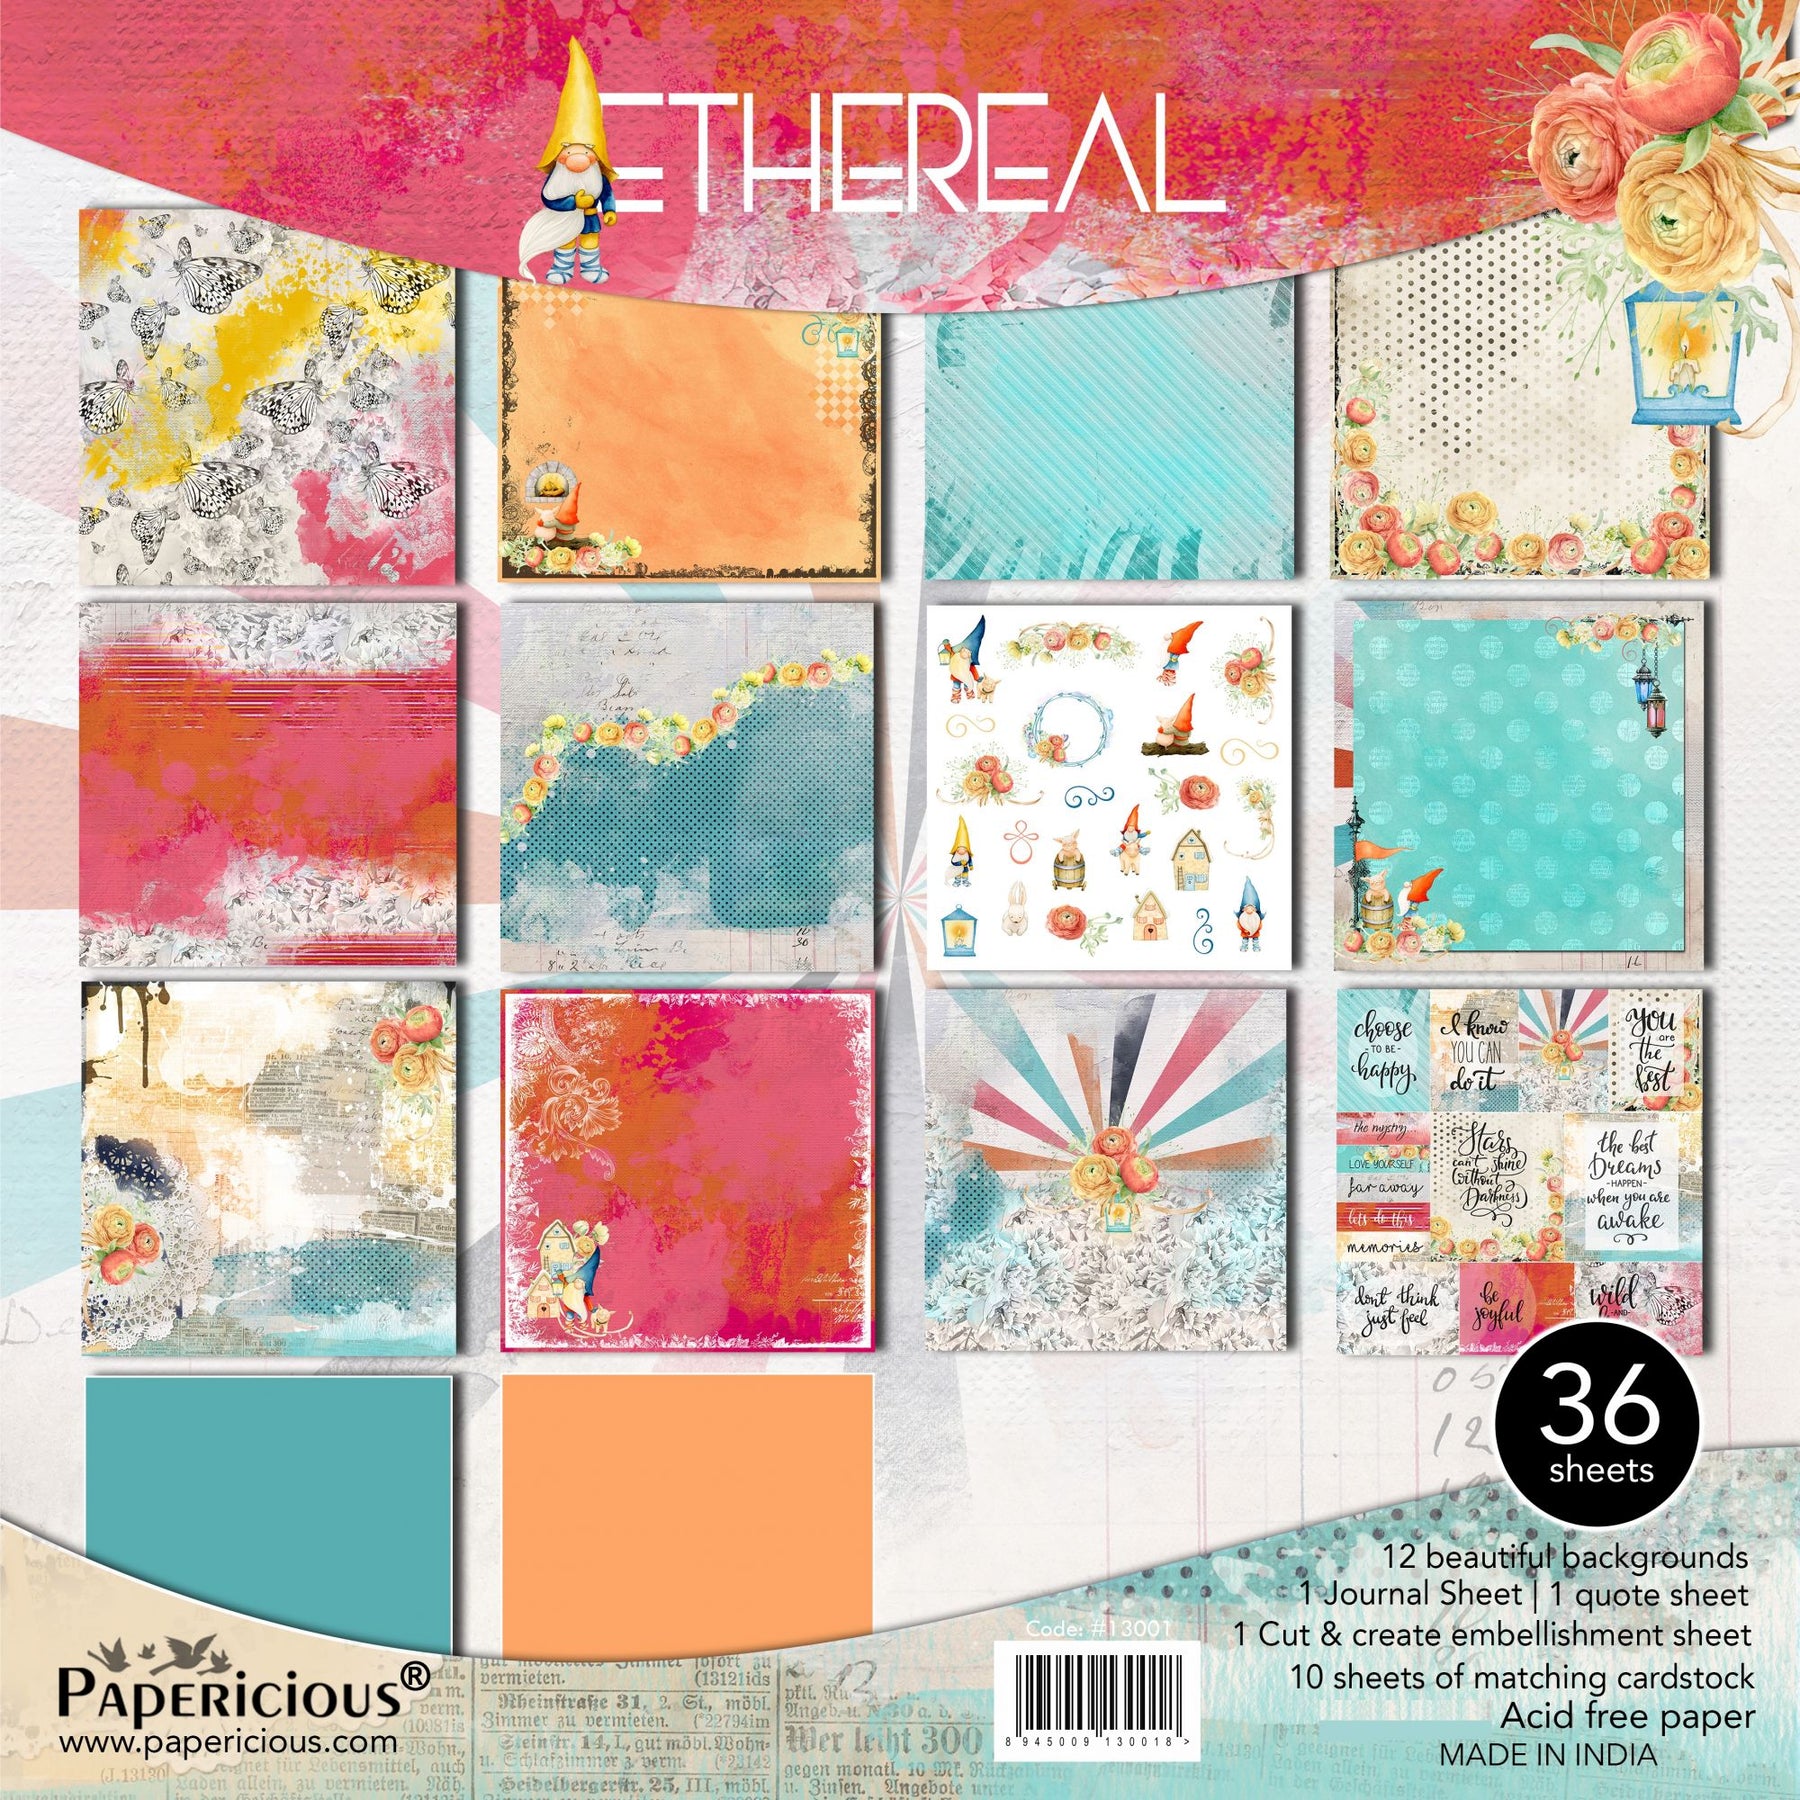 PAPERICIOUS - Ethereal -  Designer Pattern Printed Scrapbook Papers 12x12 inch / 36 sheets